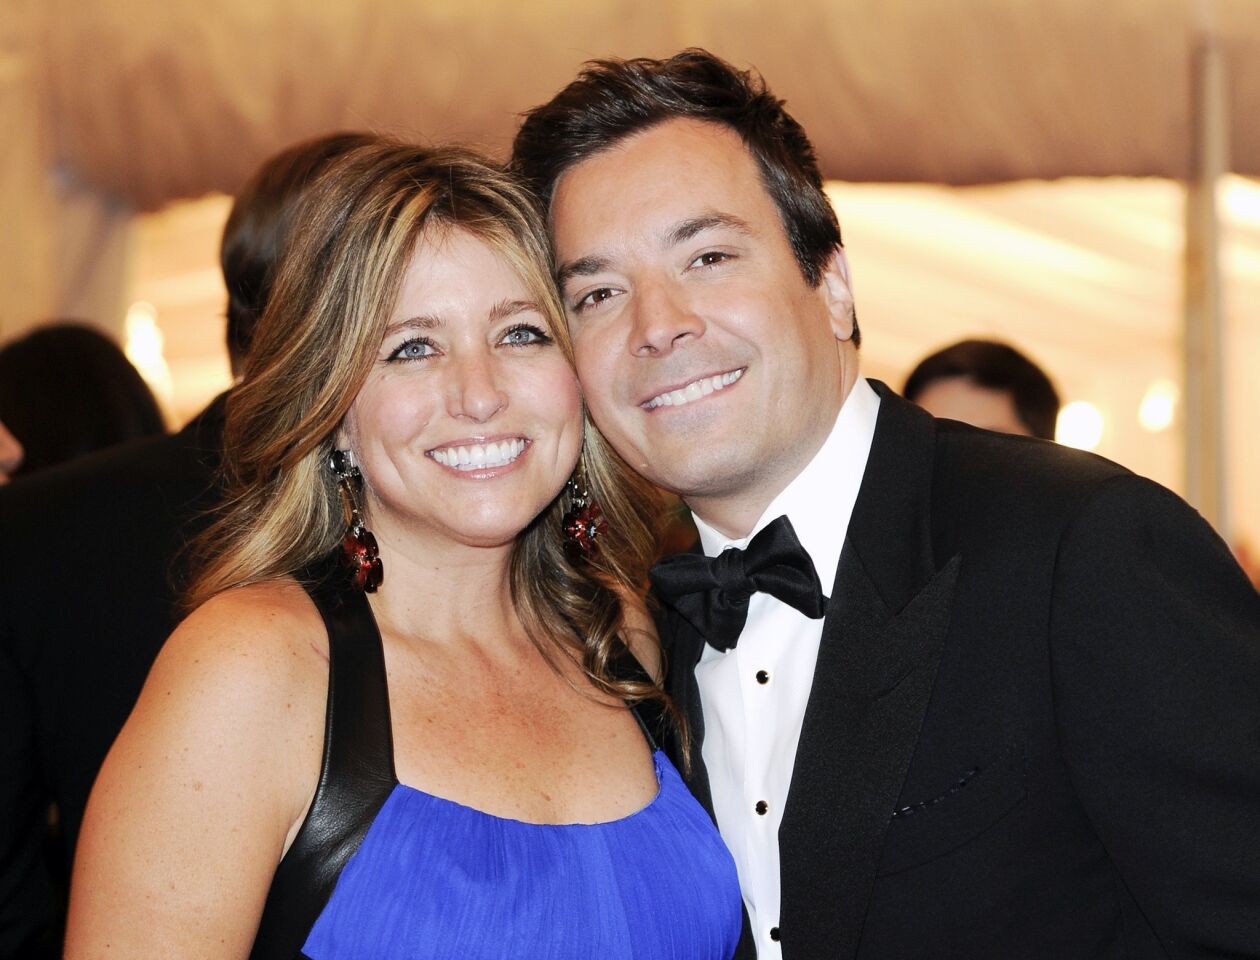 Late-night host Jimmy Fallon and his wife Nancy Juvonen are now parents for a second time to daughter Frances Cole Fallon, who joins big sister, Winnie Rose, just 16 months older than she is.